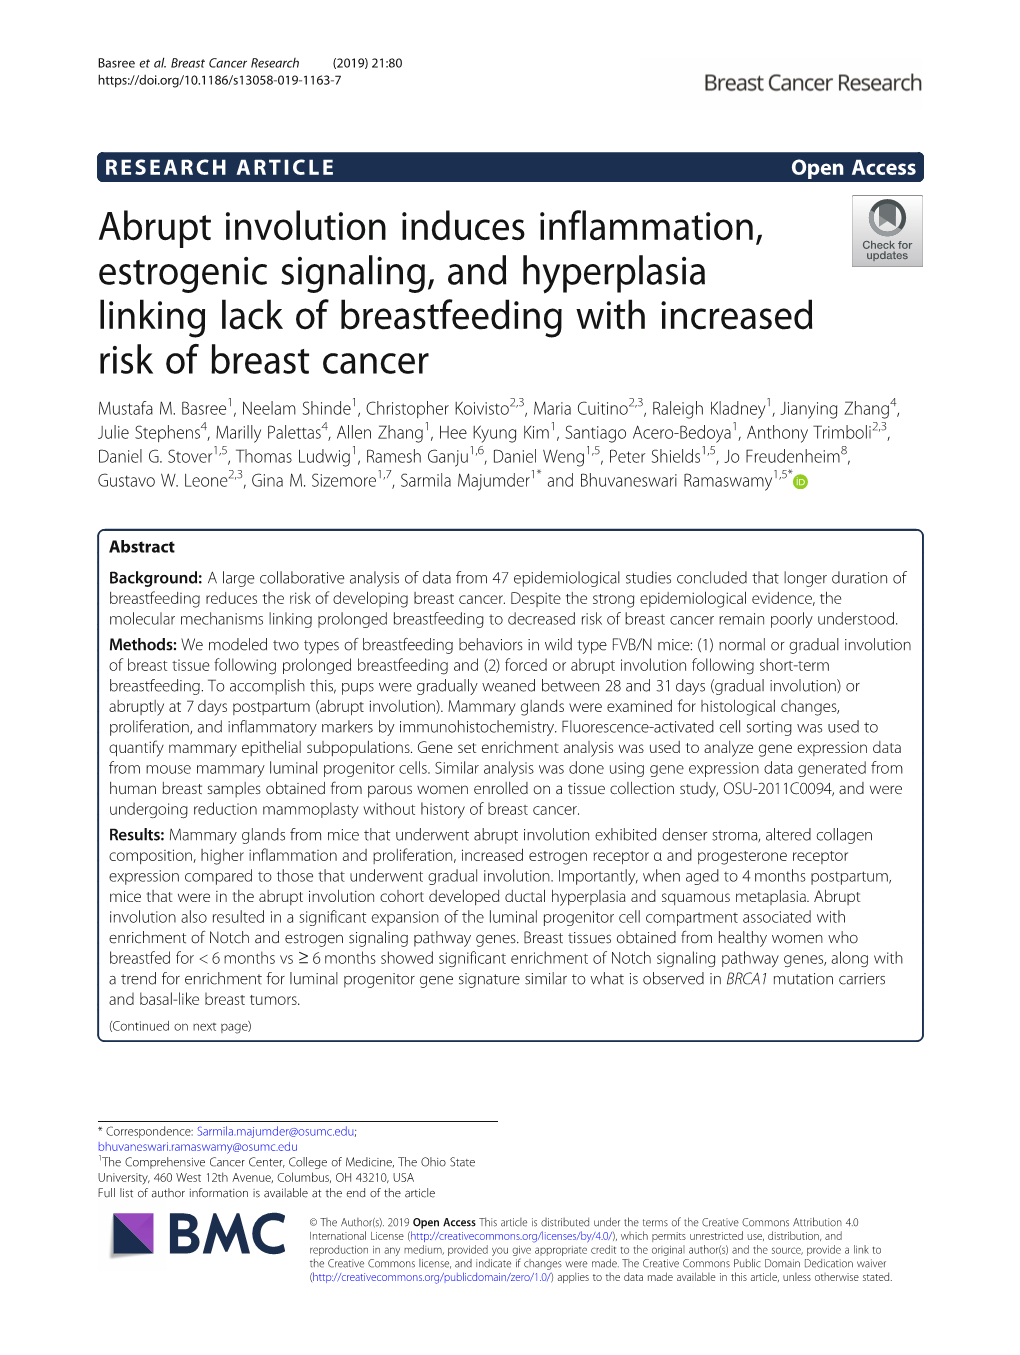 Abrupt Involution Induces Inflammation, Estrogenic Signaling, and Hyperplasia Linking Lack of Breastfeeding with Increased Risk of Breast Cancer Mustafa M